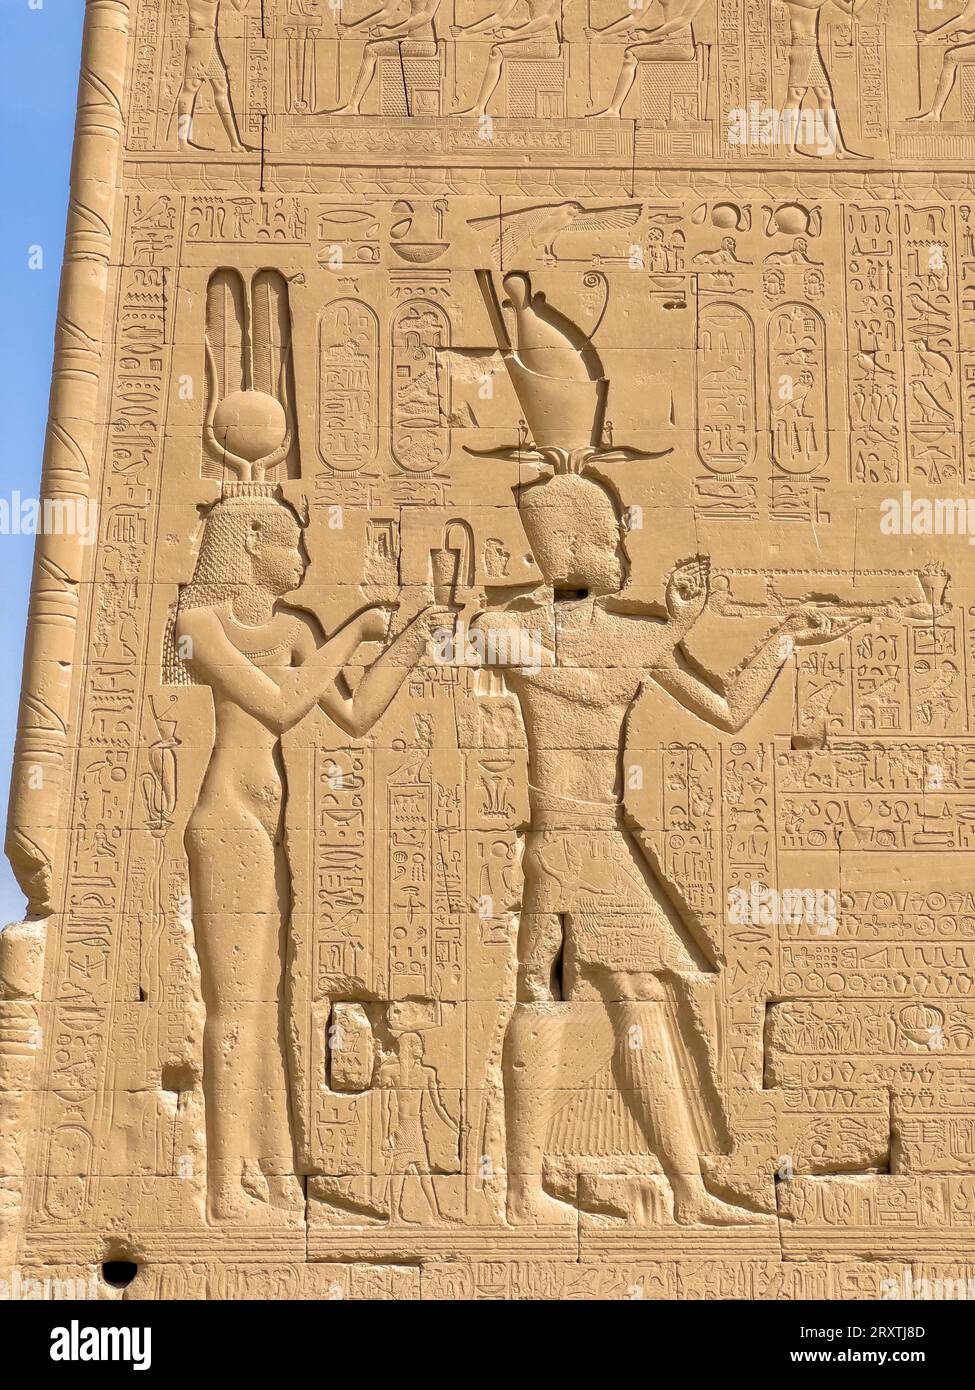 Reliefs of Cleopatra VII and her son by Julius Caesar, Caesarion at the Dendera Temple complex, Dendera, Egypt, North Africa, Africa Stock Photo